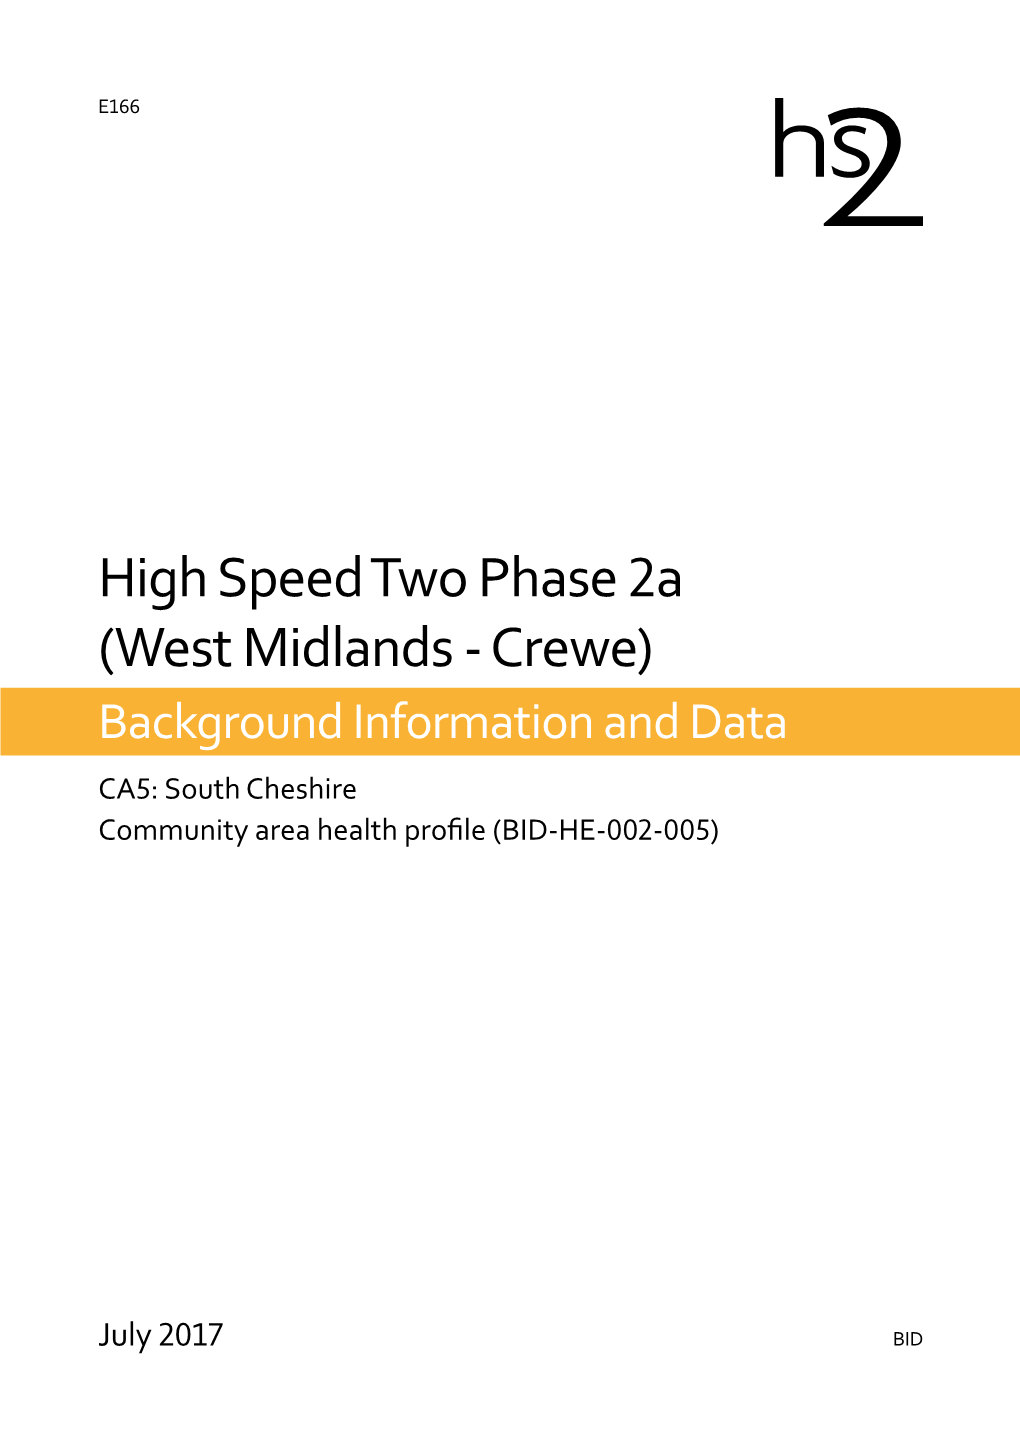 High Speed Two Phase 2A (West Midlands - Crewe) Background Information and Data CA5: South Cheshire Community Area Health Profile (BID-HE-002-005)